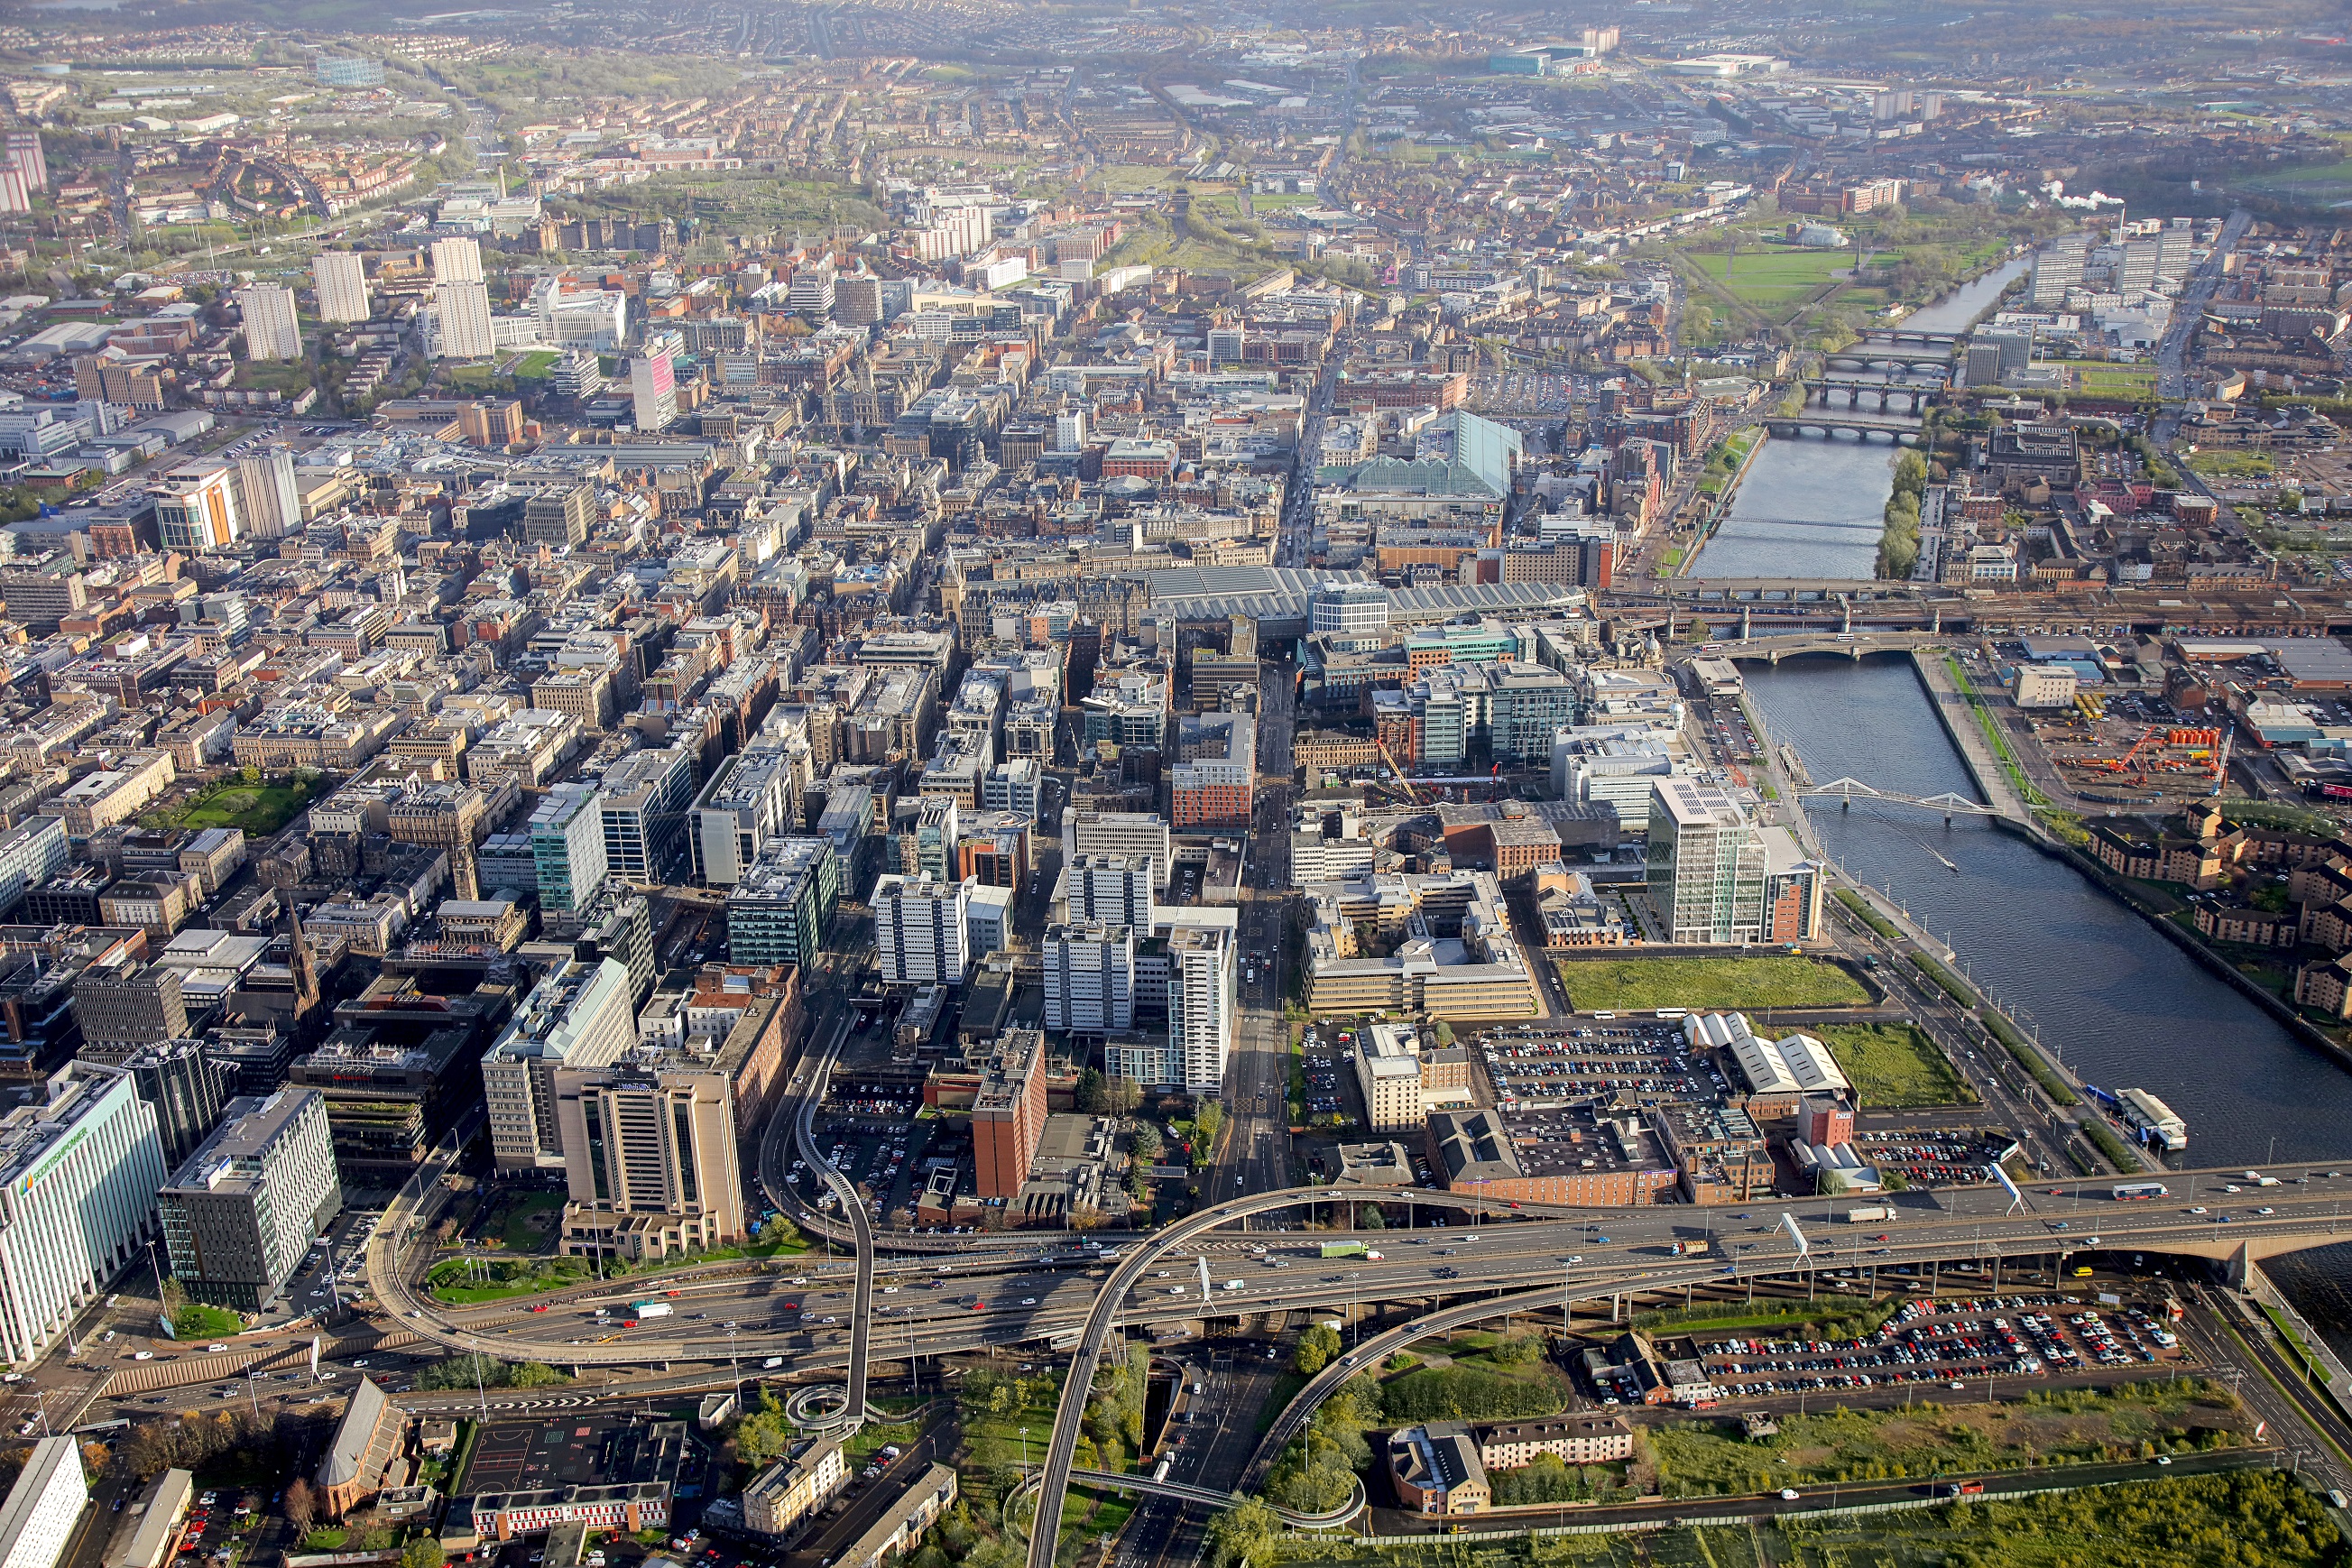 Glasgow to consider Place Commission recommendations